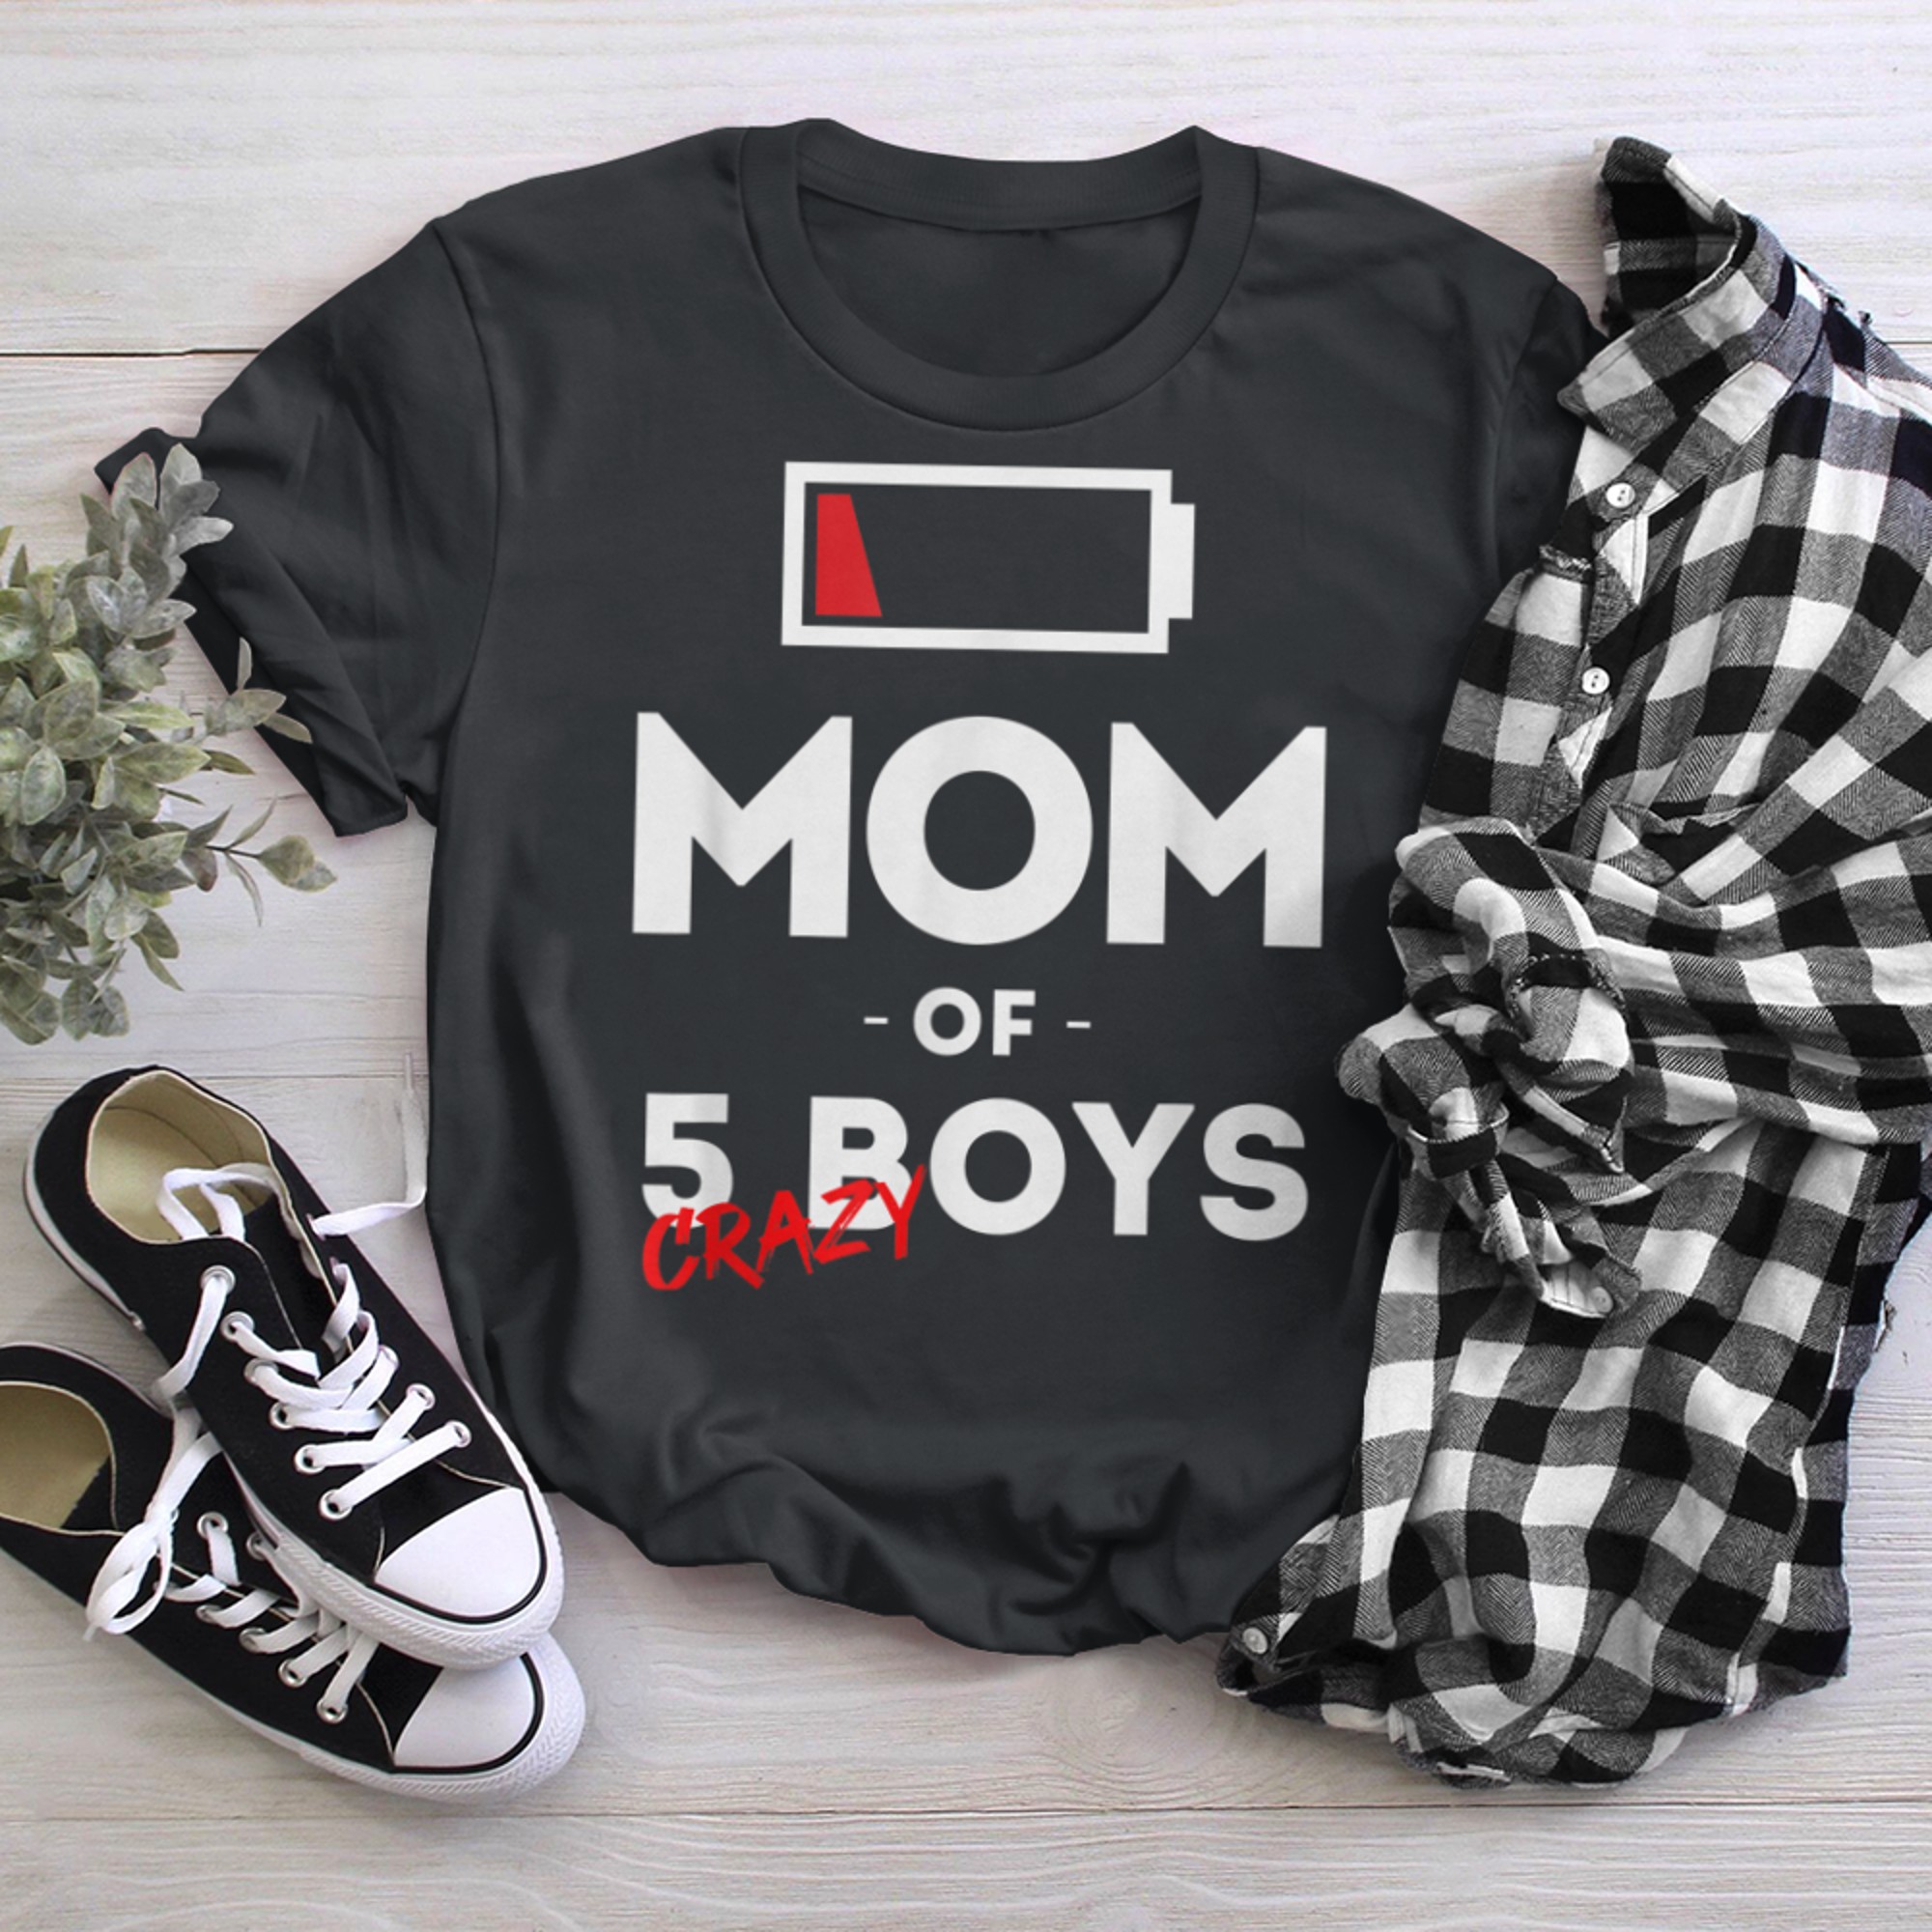 Mom of Crazy Clothing Mother Wife Funny t-shirt black